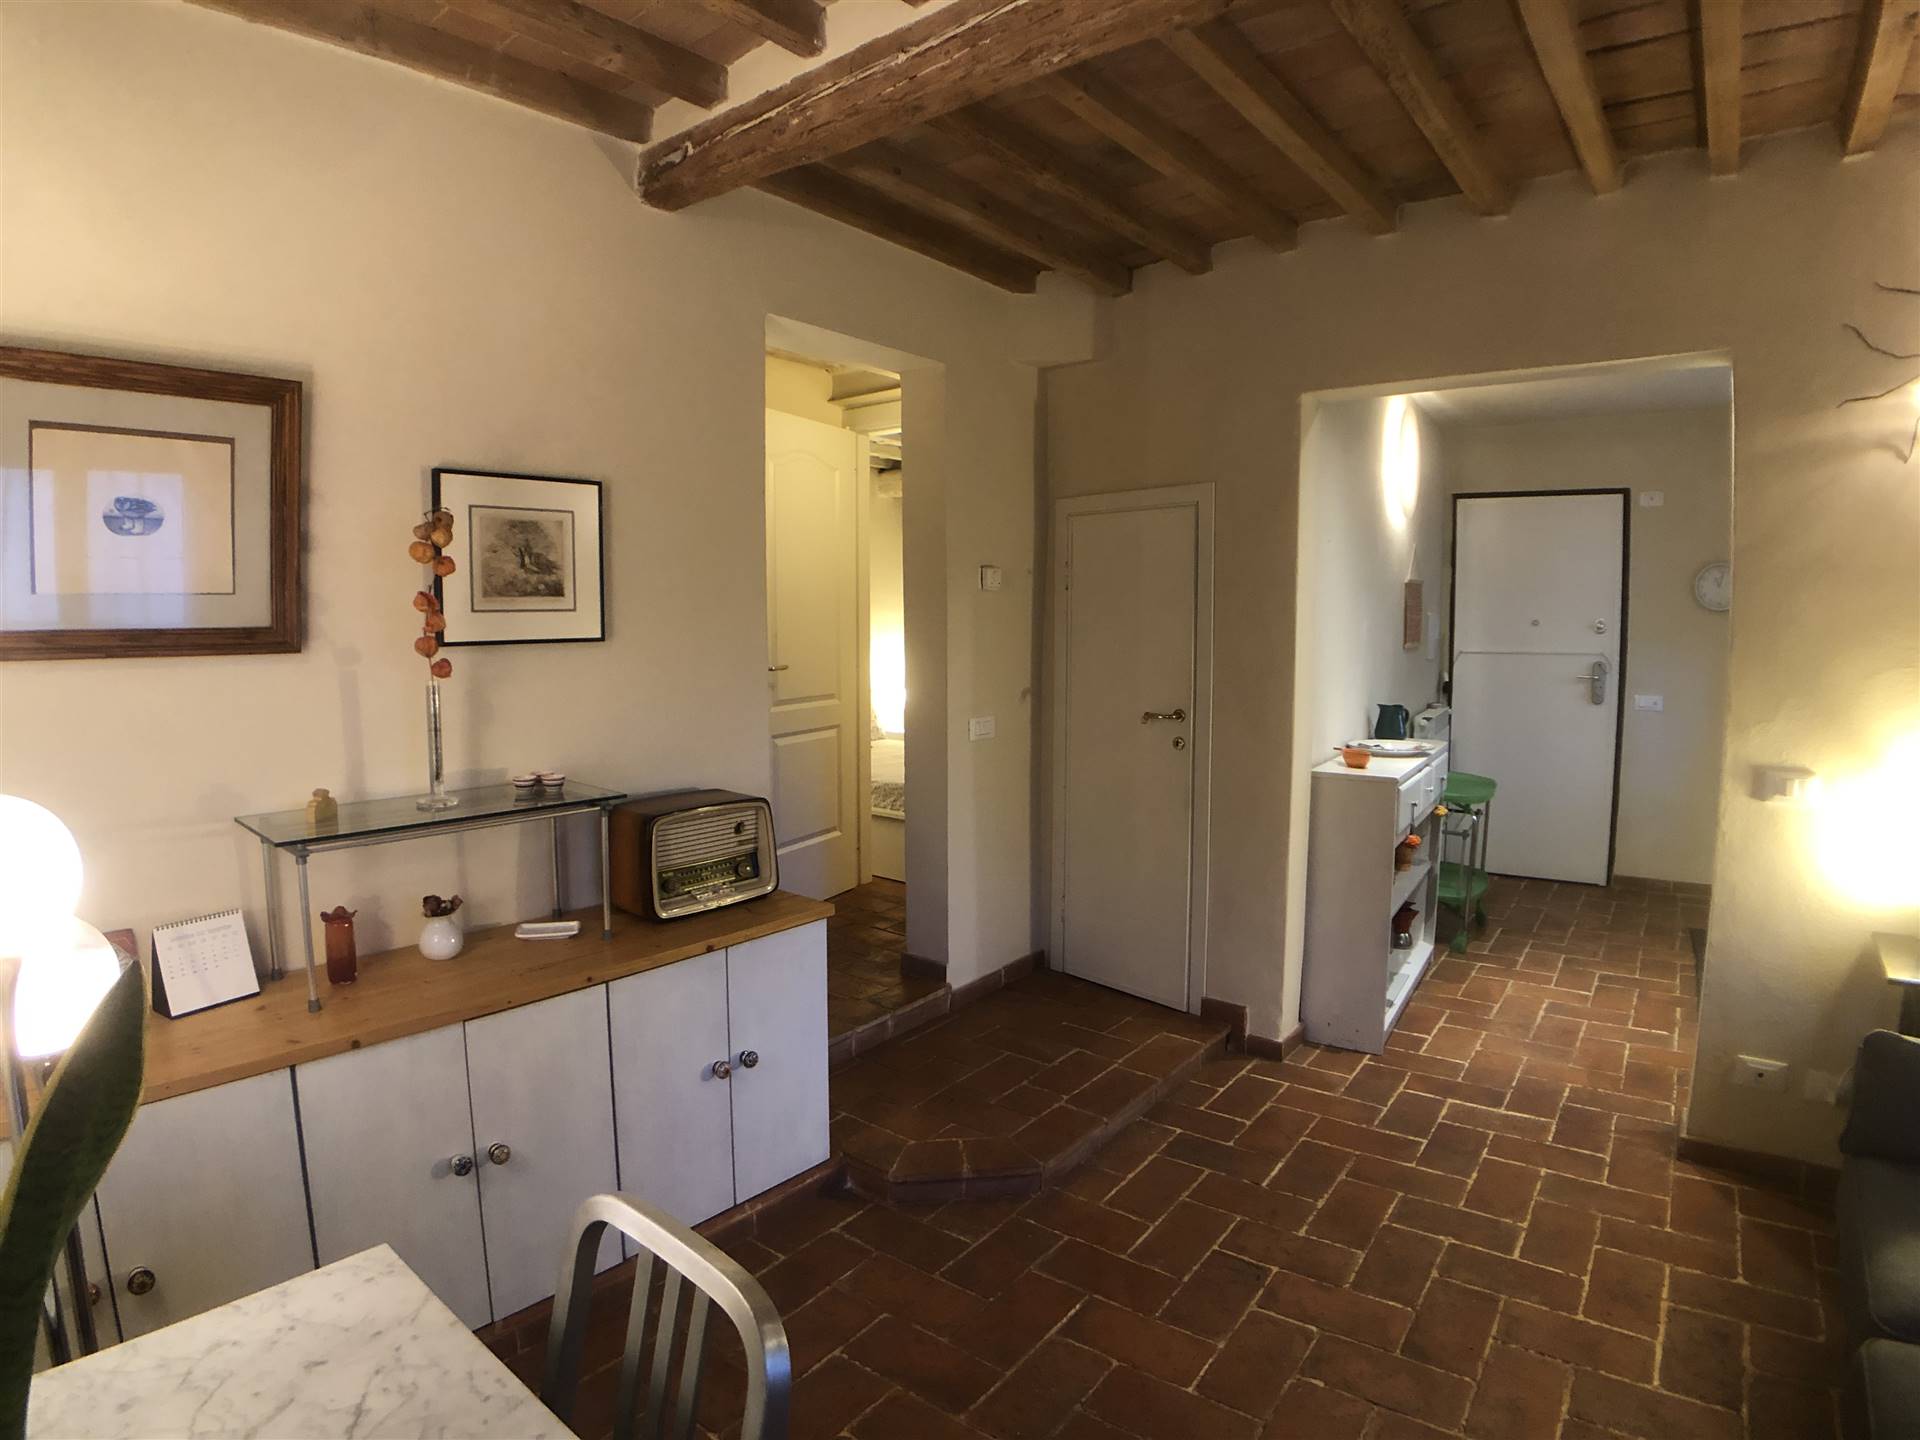 Apartment of great charm that blends the rustic Tuscan with the refinement of the details, just renovated offers guests great comfort just steps from 